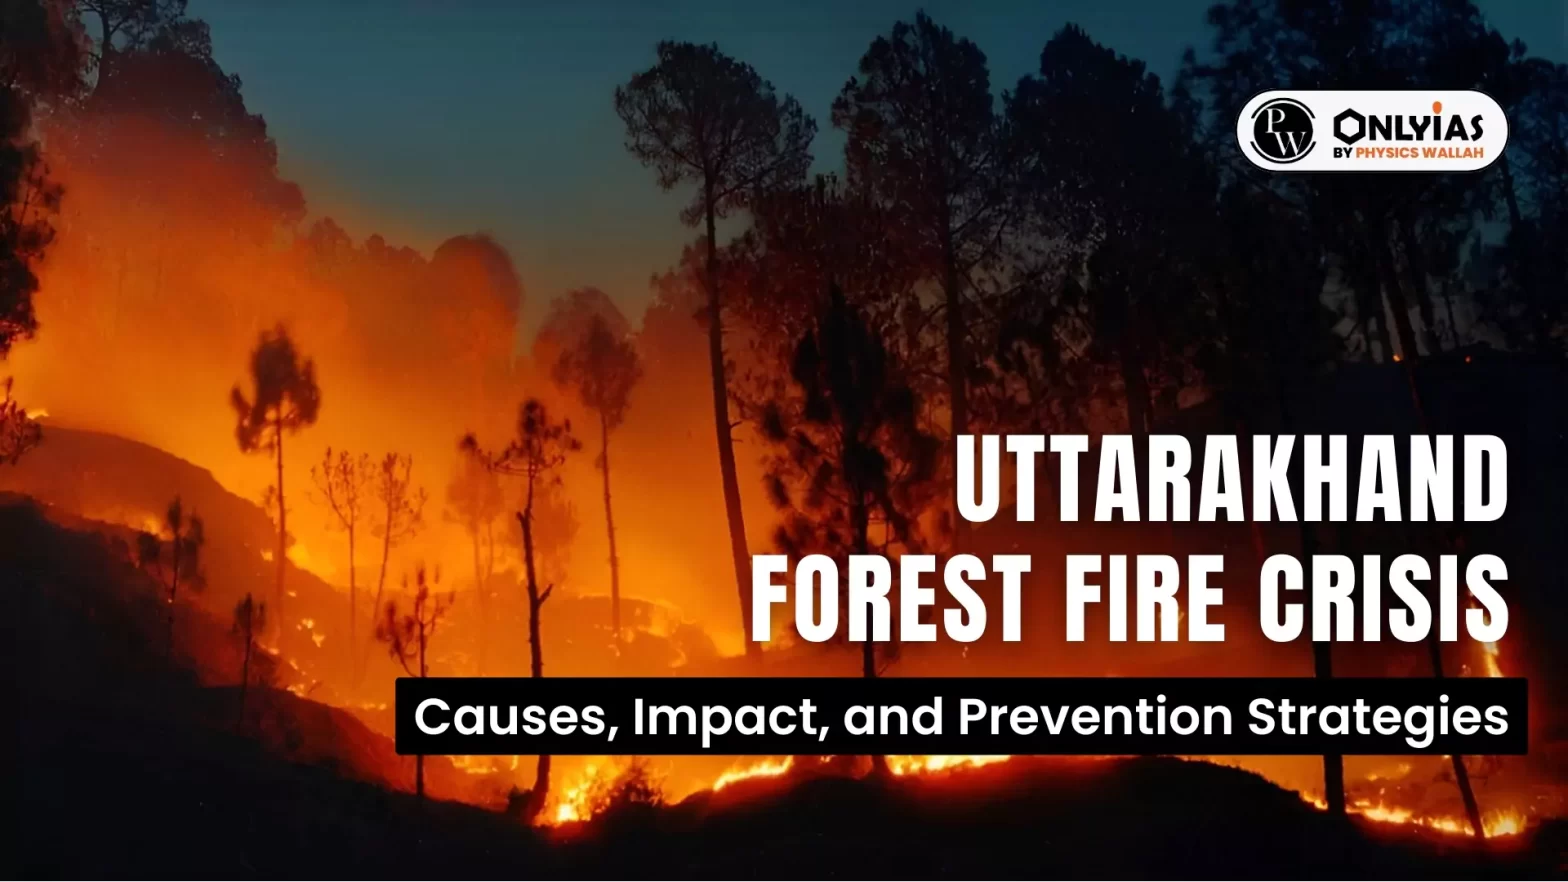 Uttarakhand Forest Fire Crisis: Causes, Impact, and Prevention Strategies